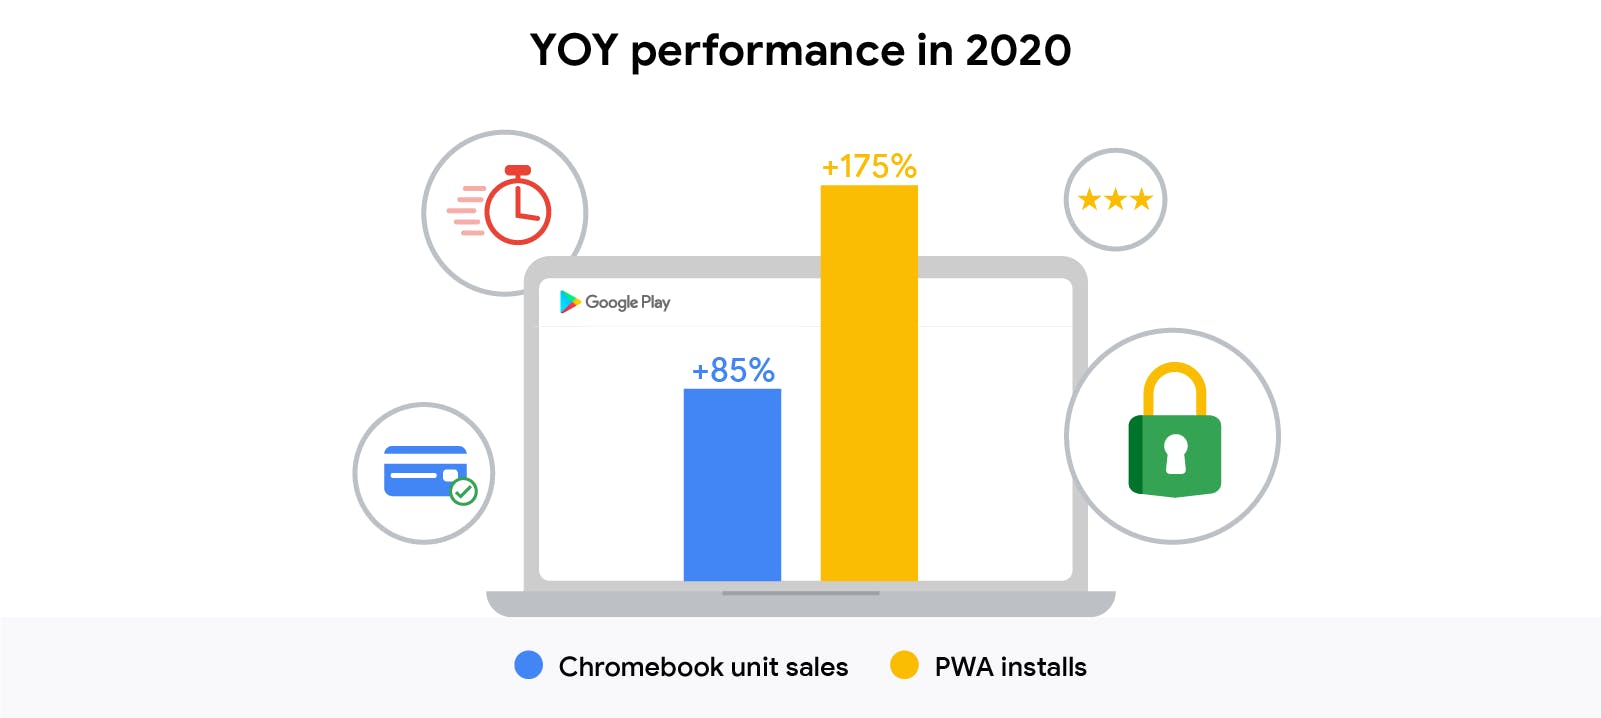 Chromebook sales have increased 85% year over year and PWA installs have increased 175% year over year.